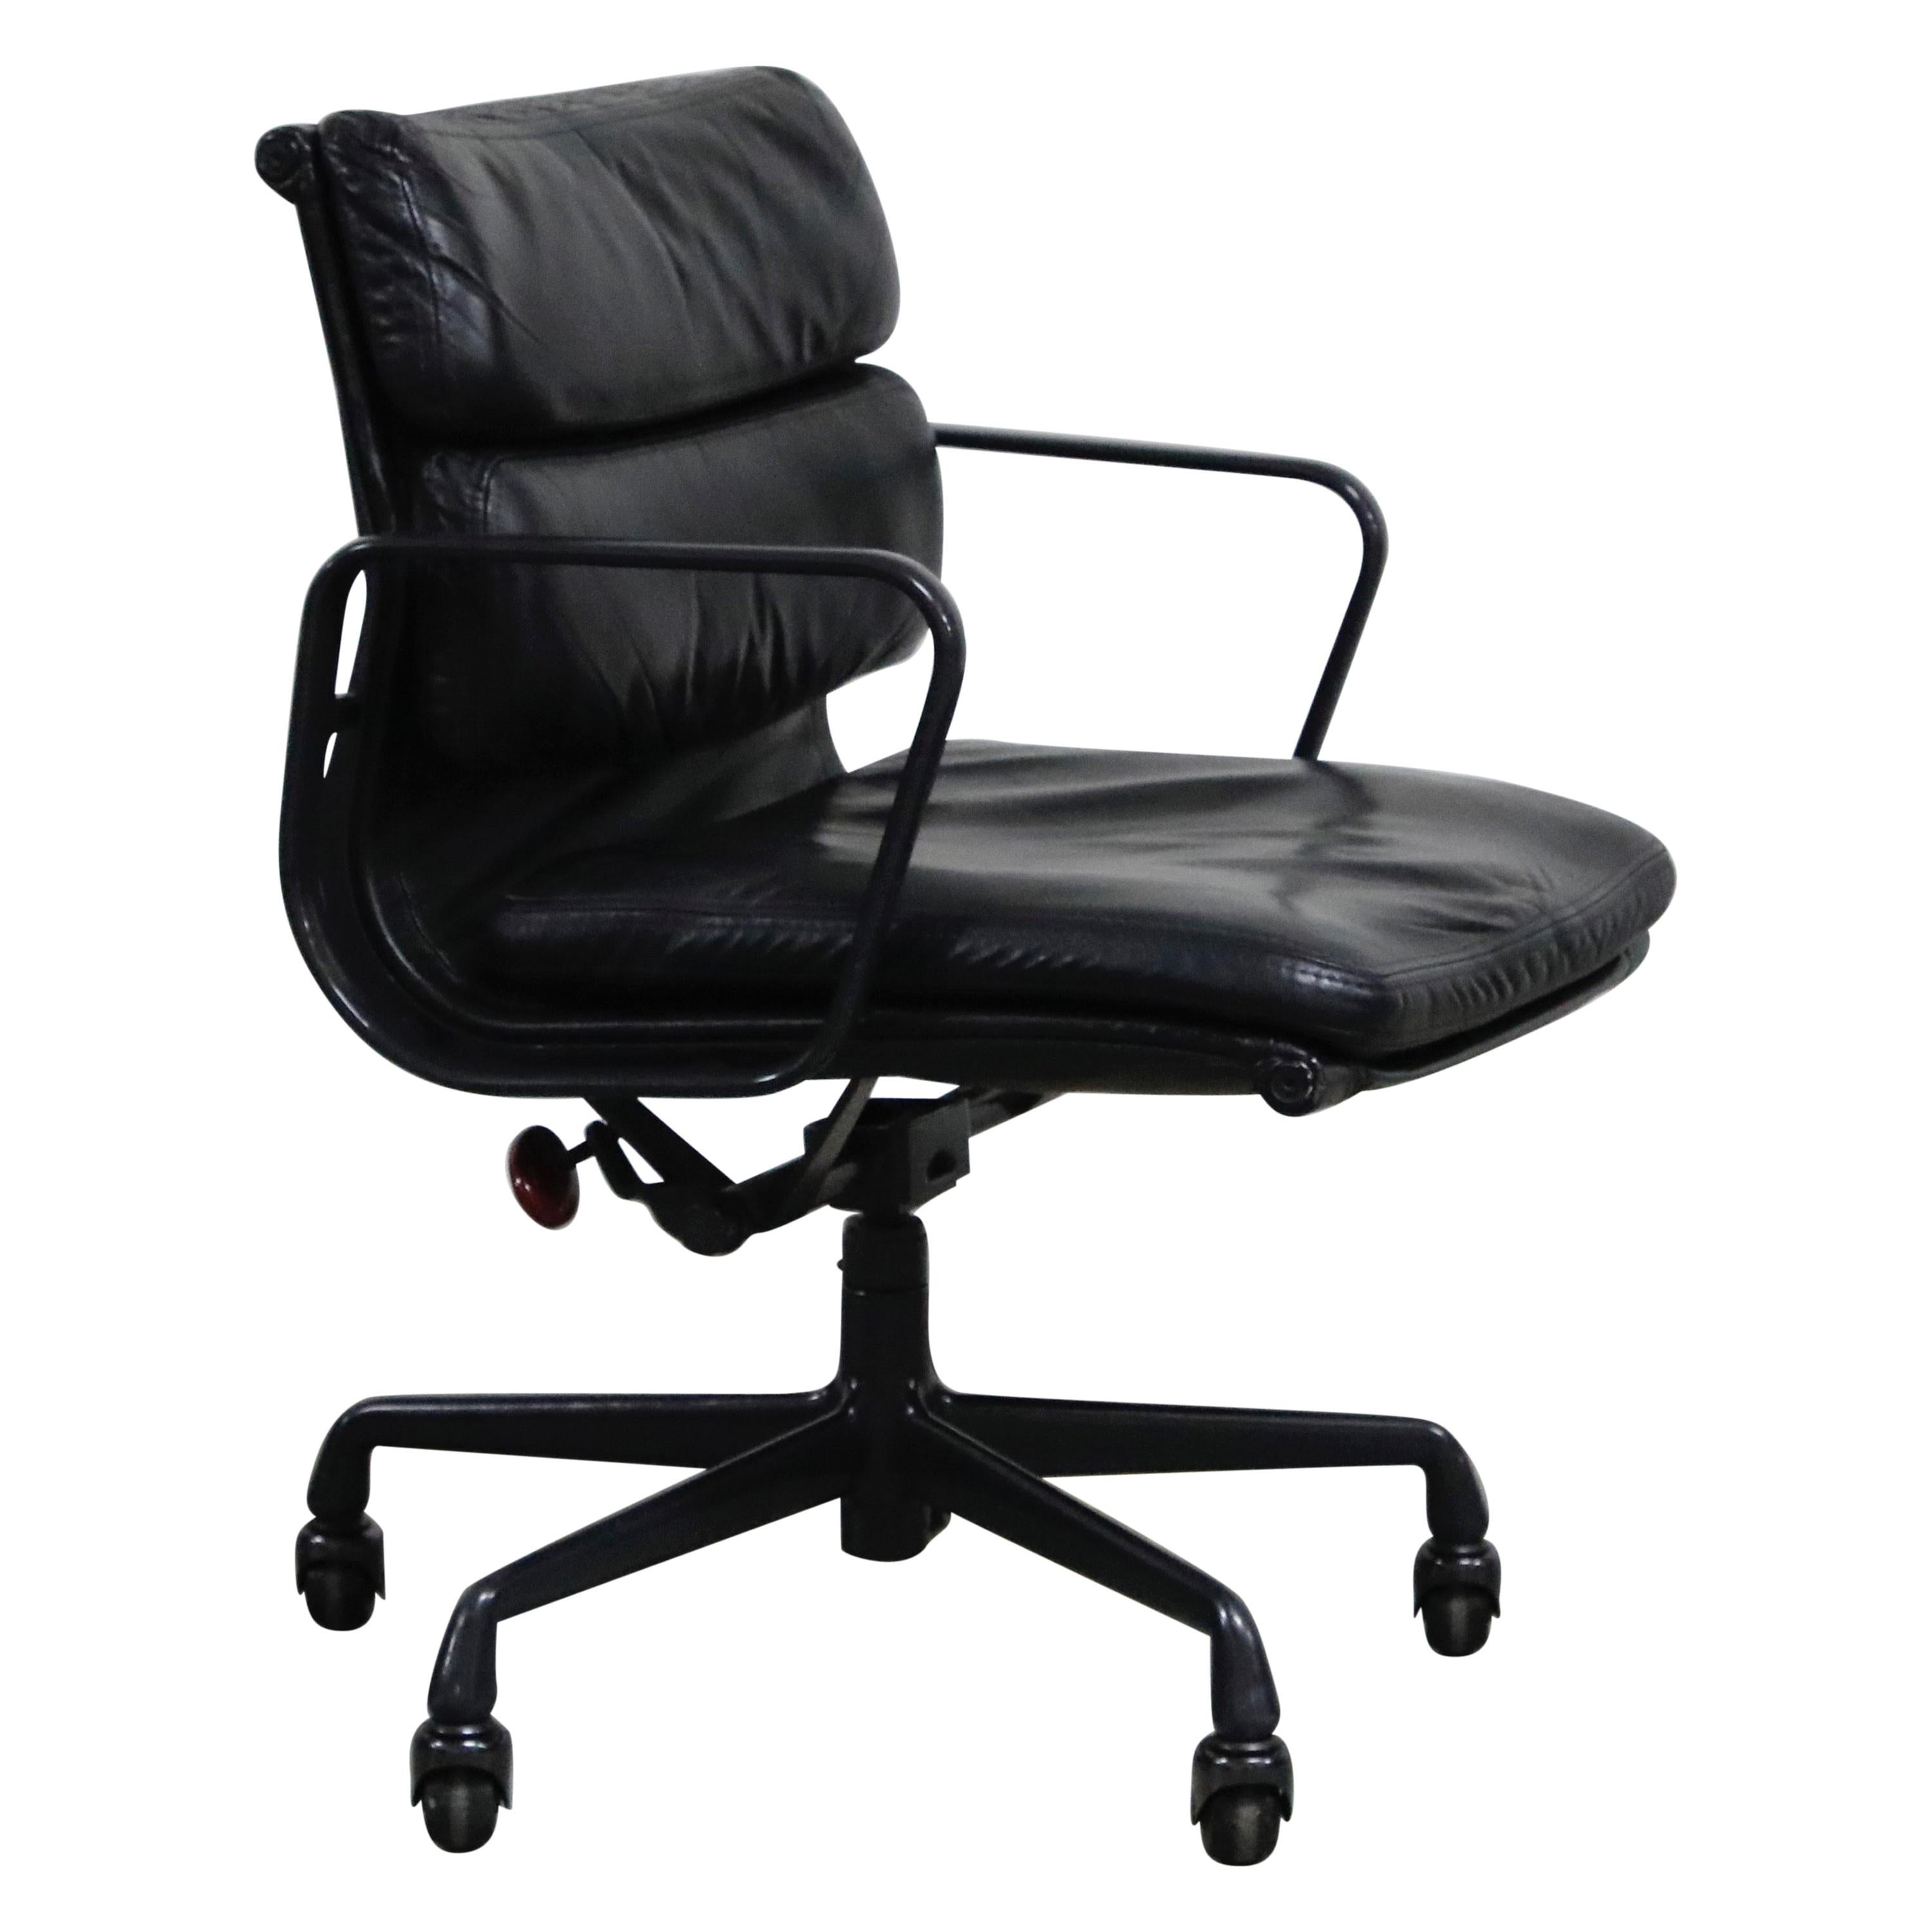 Rare Black on Black Eames Soft Pad Management Chair by Herman Miller, 1988